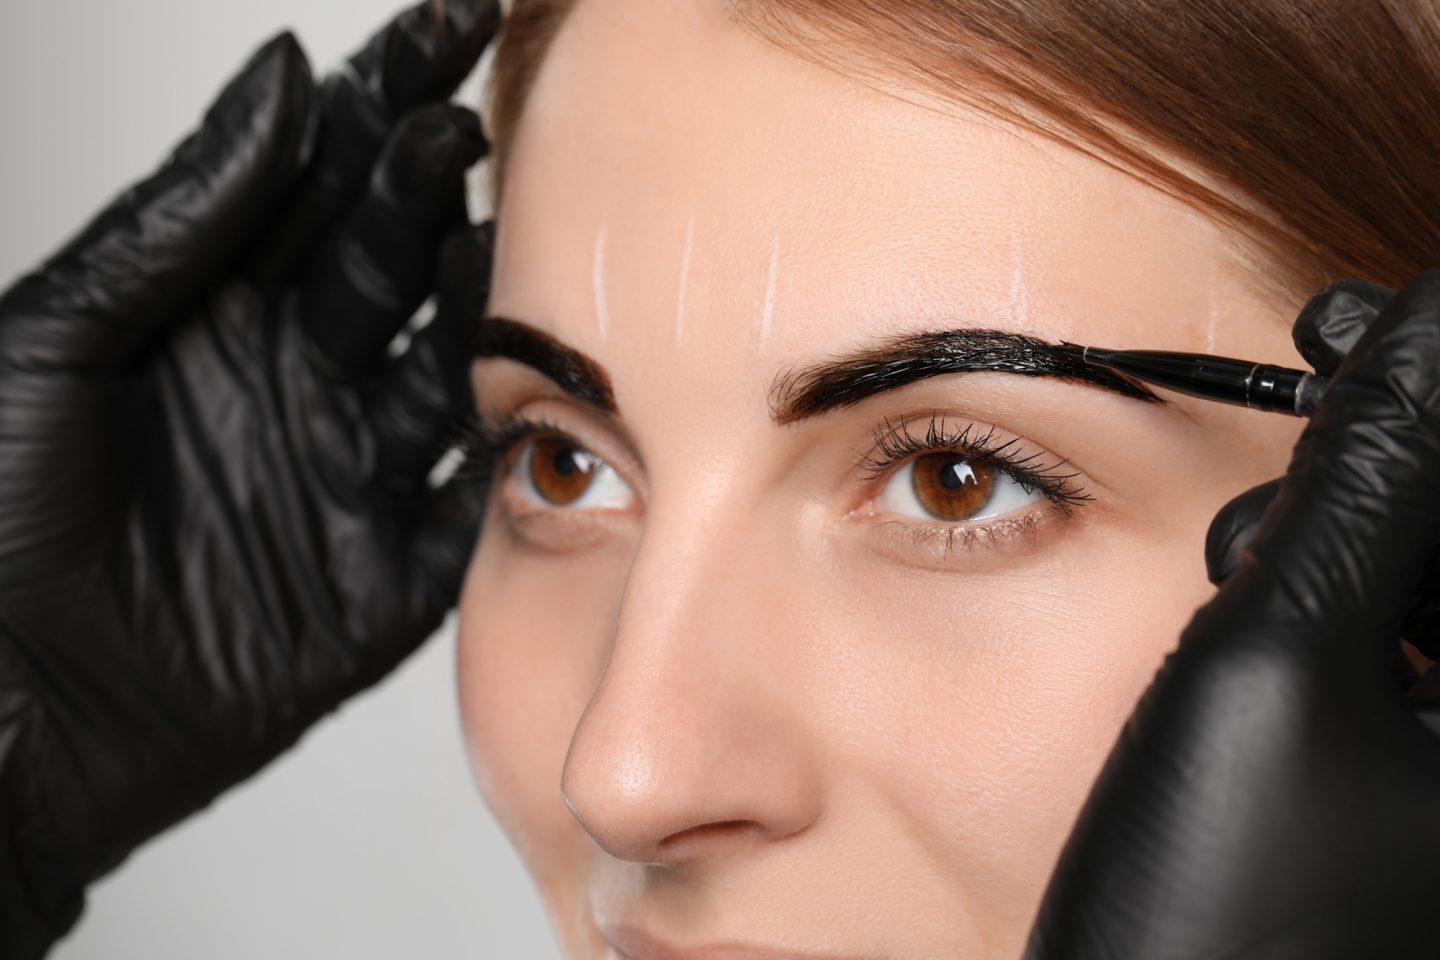 What Are the Side Effects of Brow Tint?